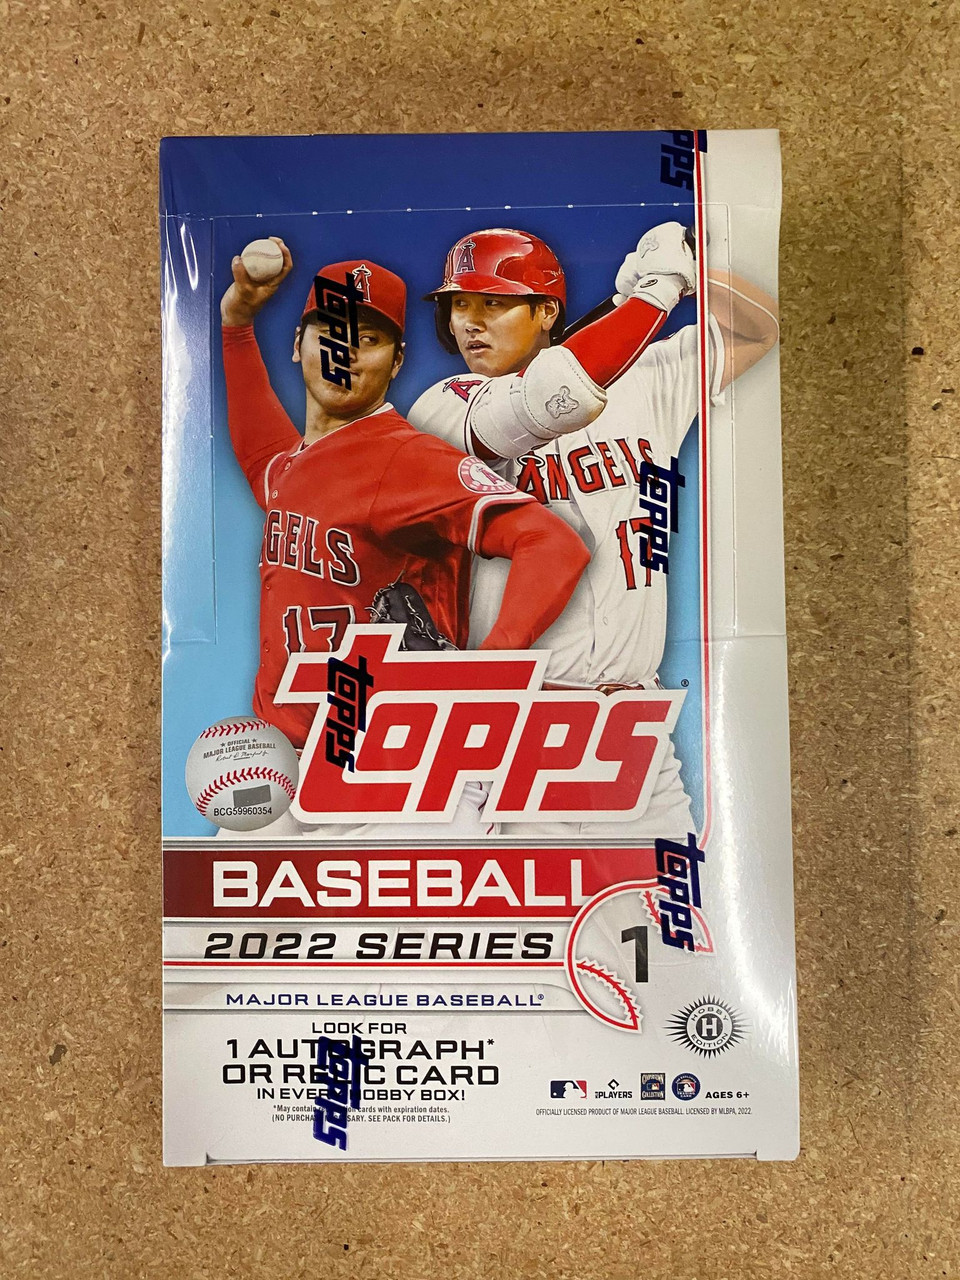  2018 Topps Update and Highlights Baseball Series